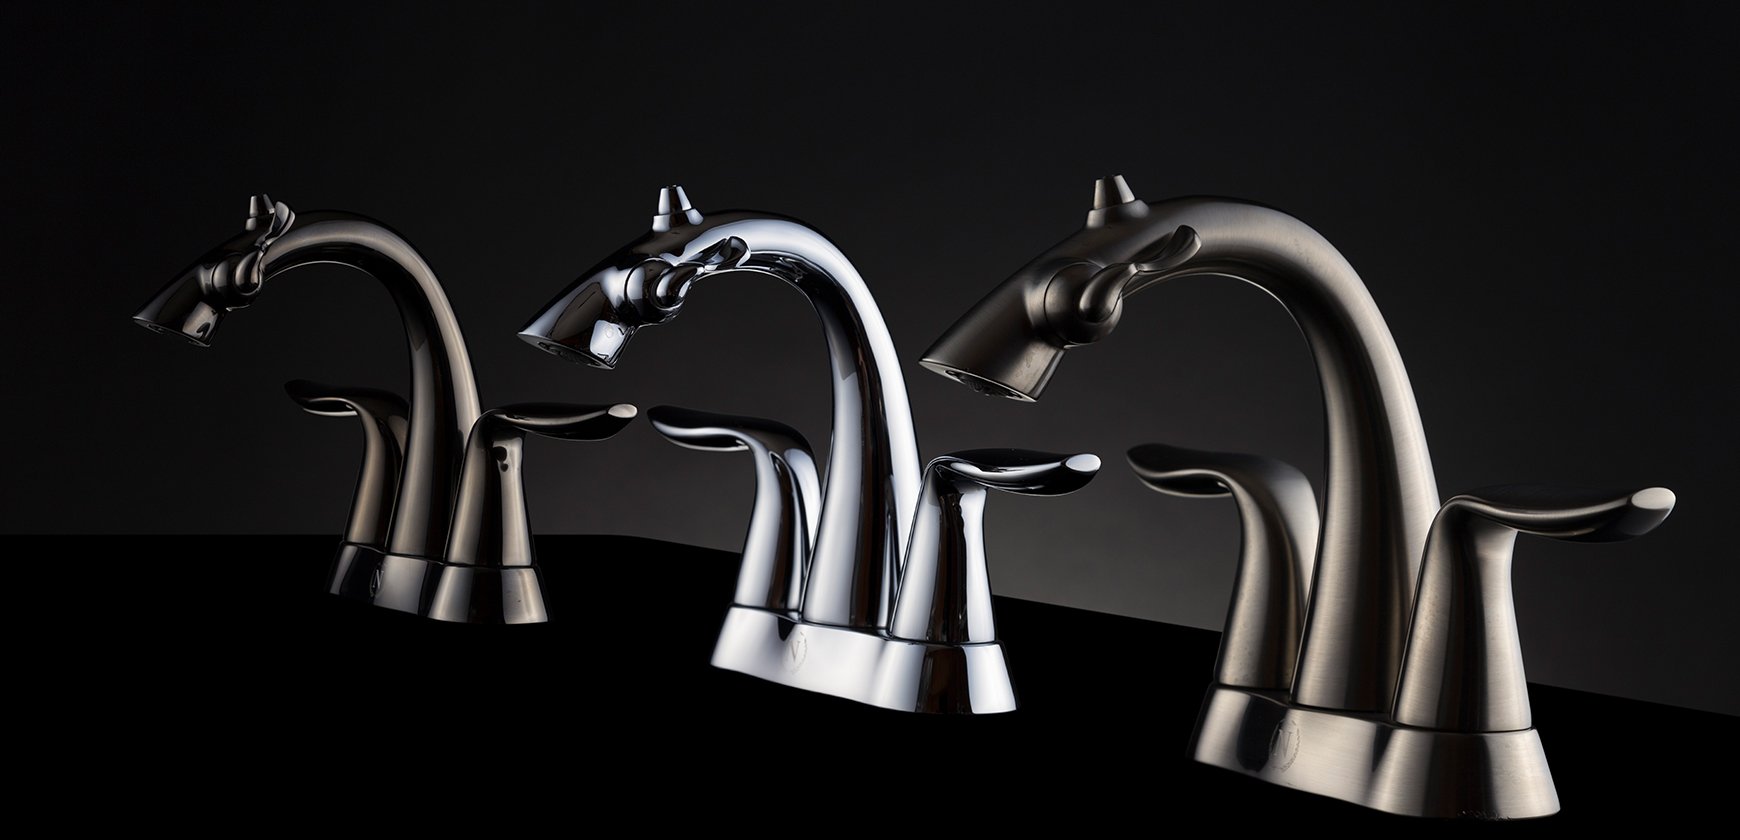 Group photo of Nasoni Centerset Fountain Faucets on Black Background